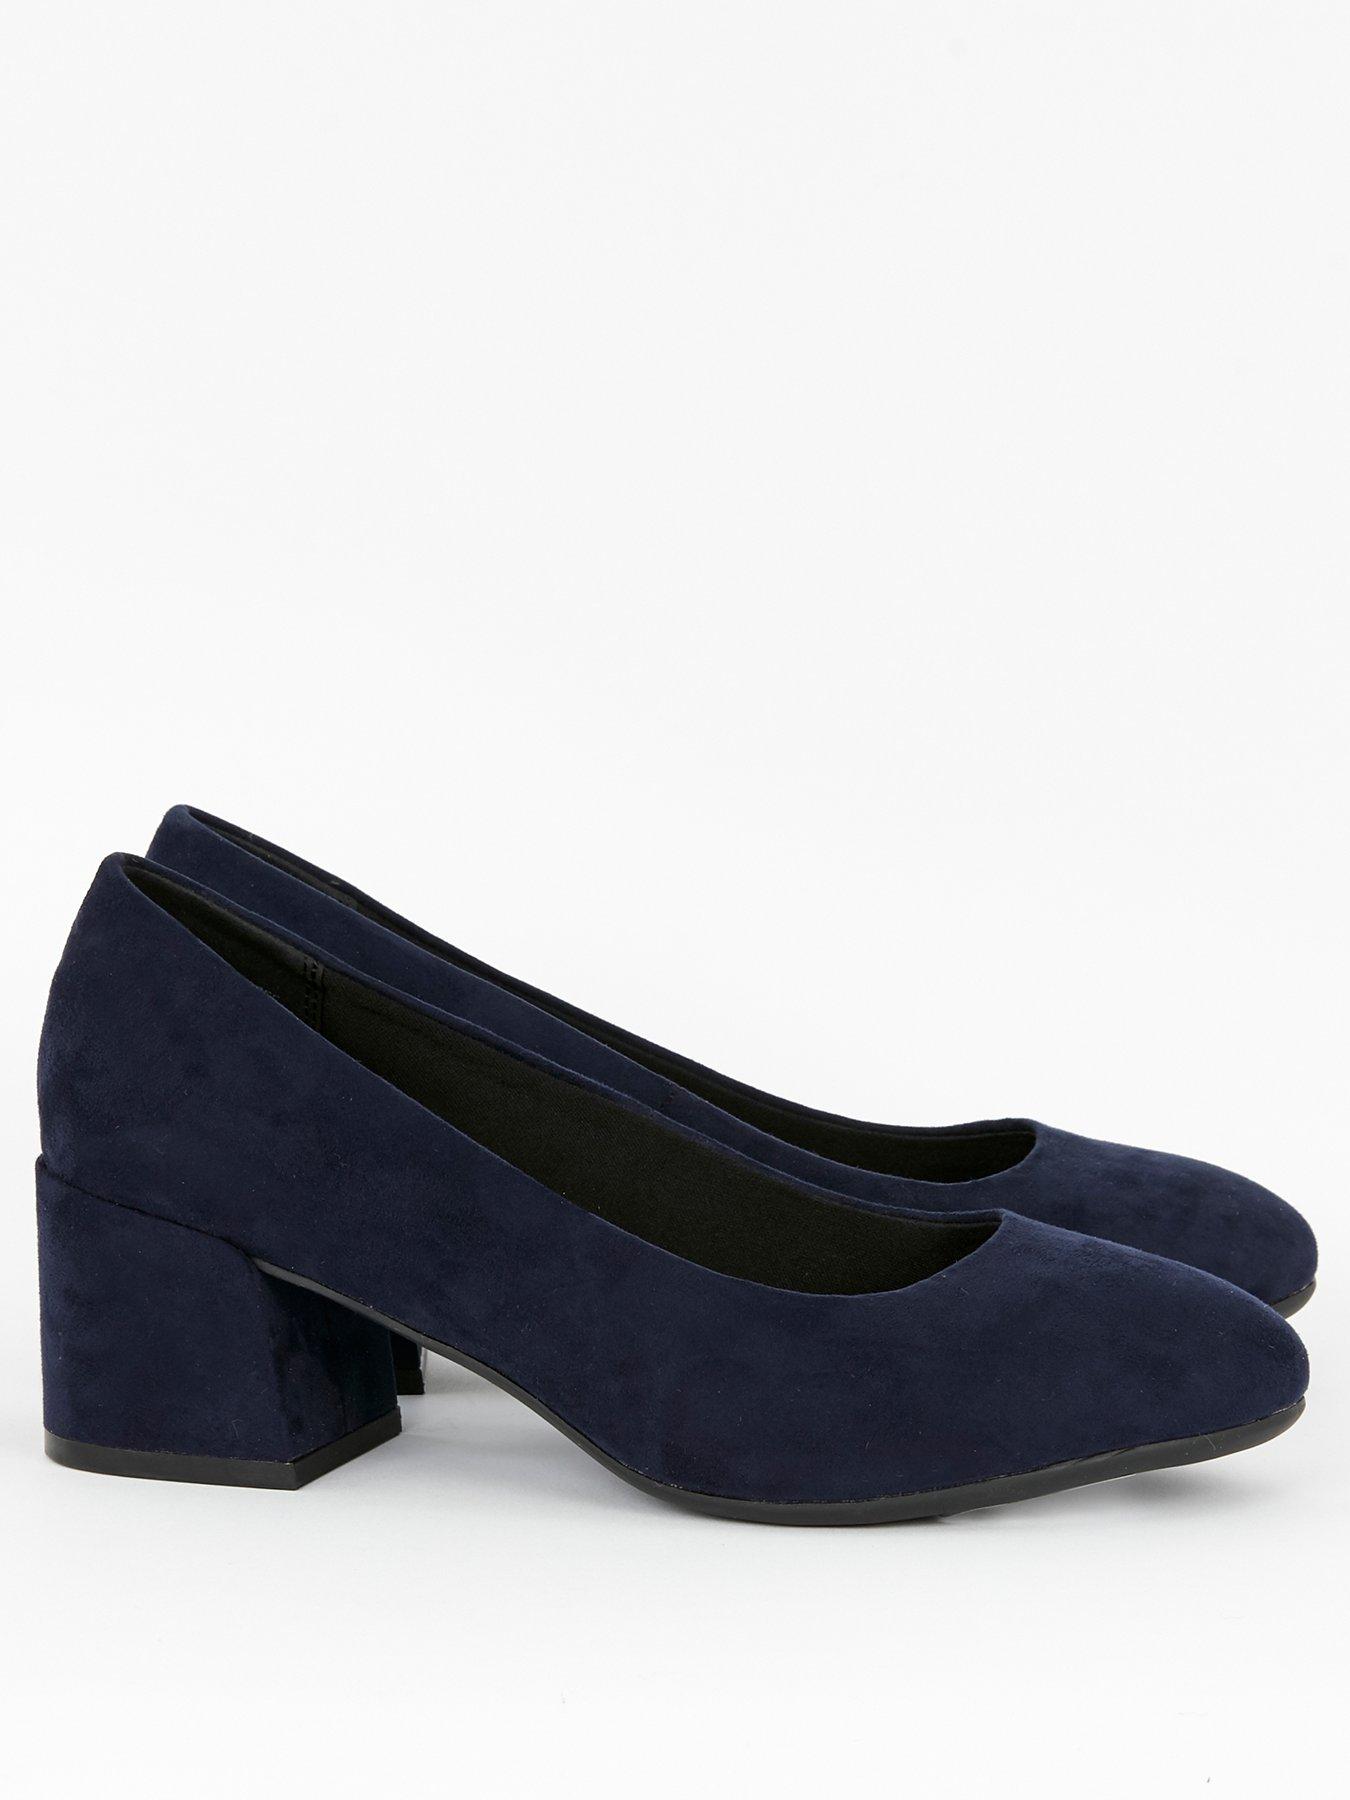 wide navy shoes